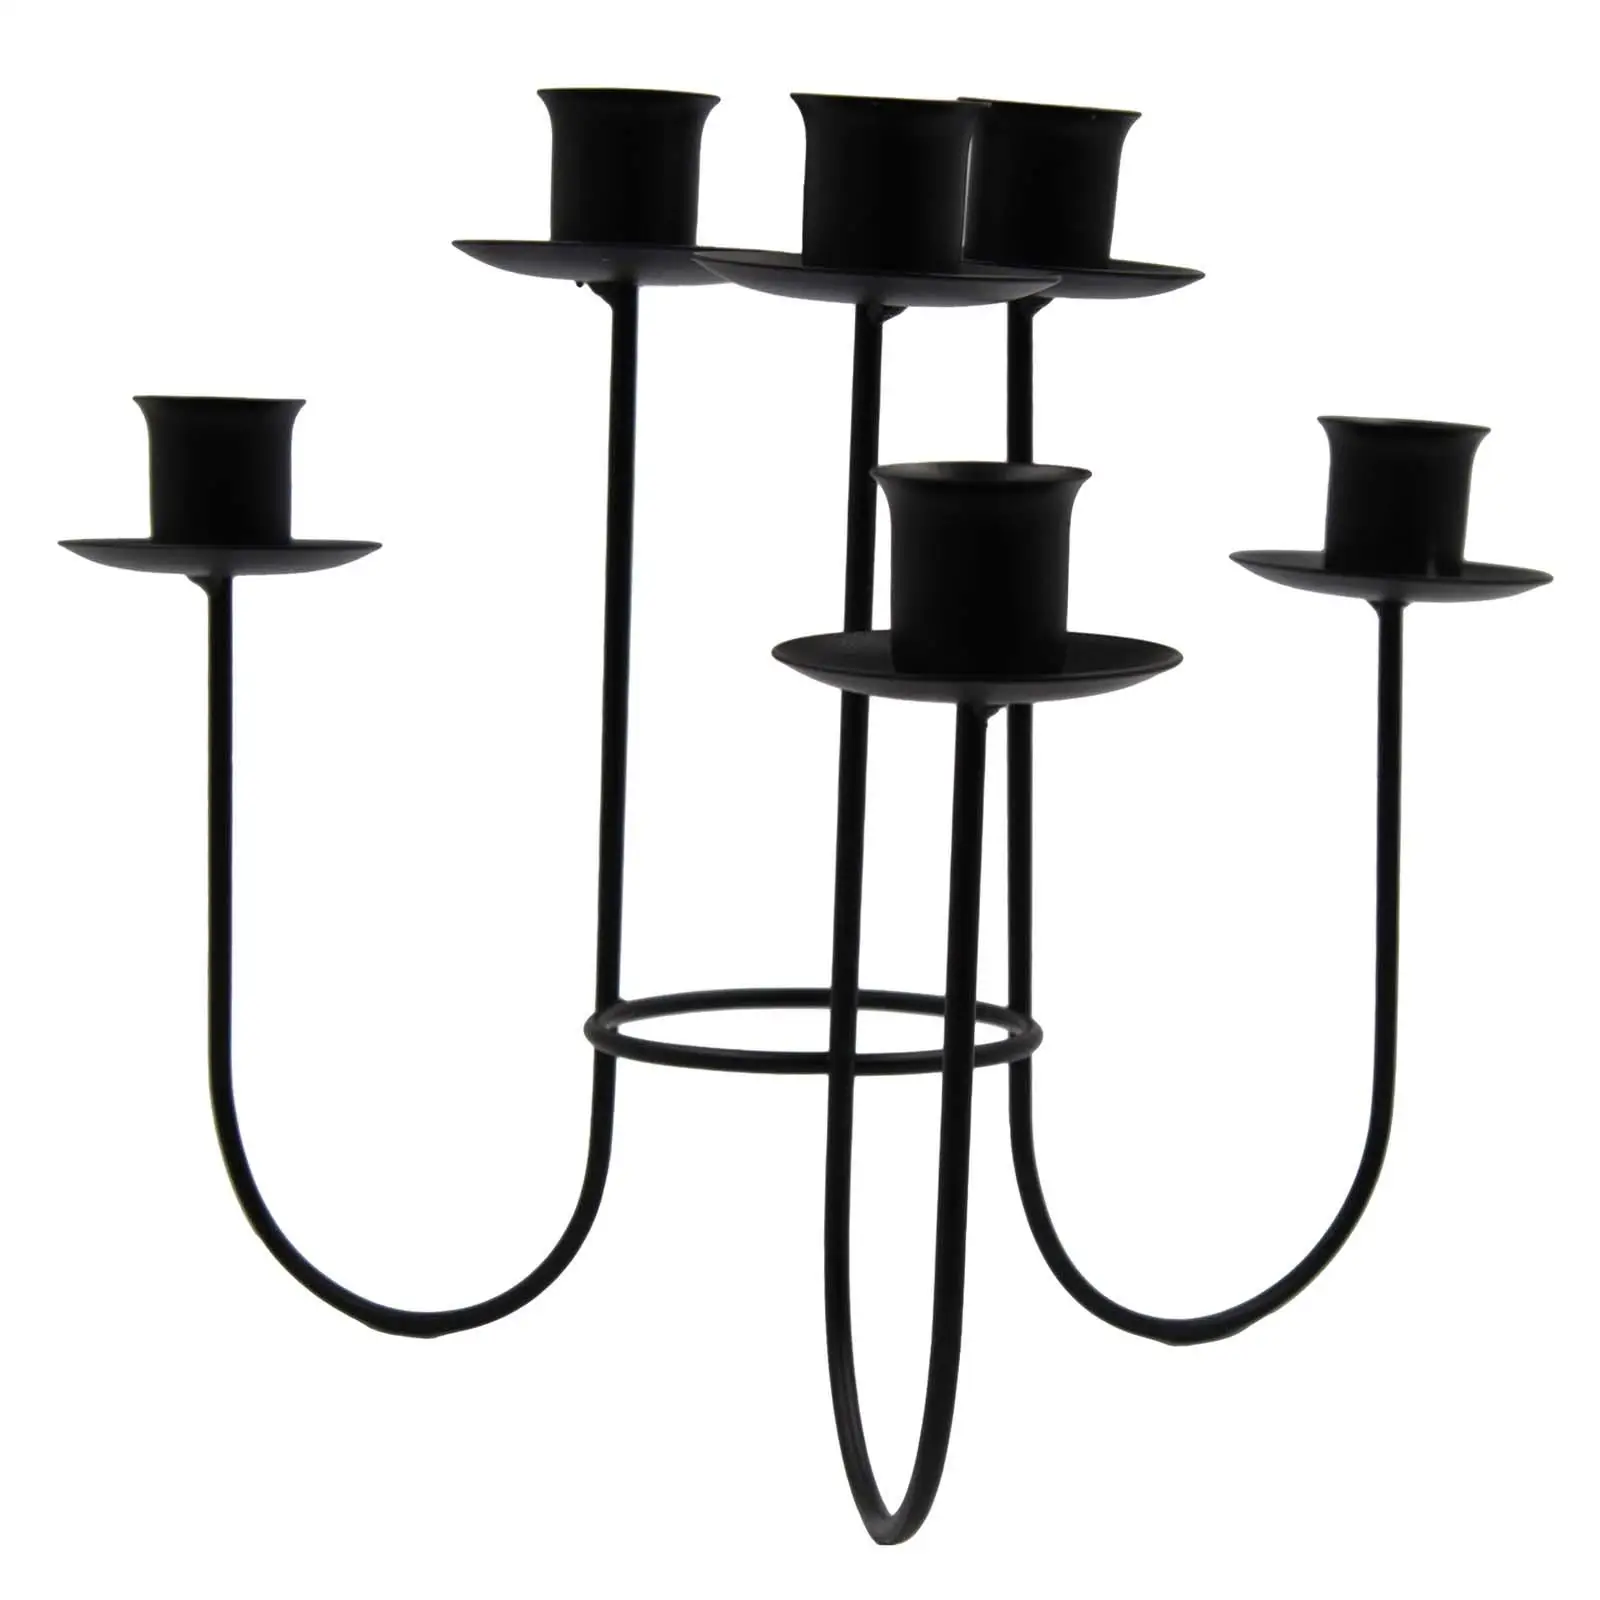 Multi Arms Metal Candle Holder Candle Stand 10x8inch Decorative Iron Art Table Ornament for Dining Table Smooth Surface